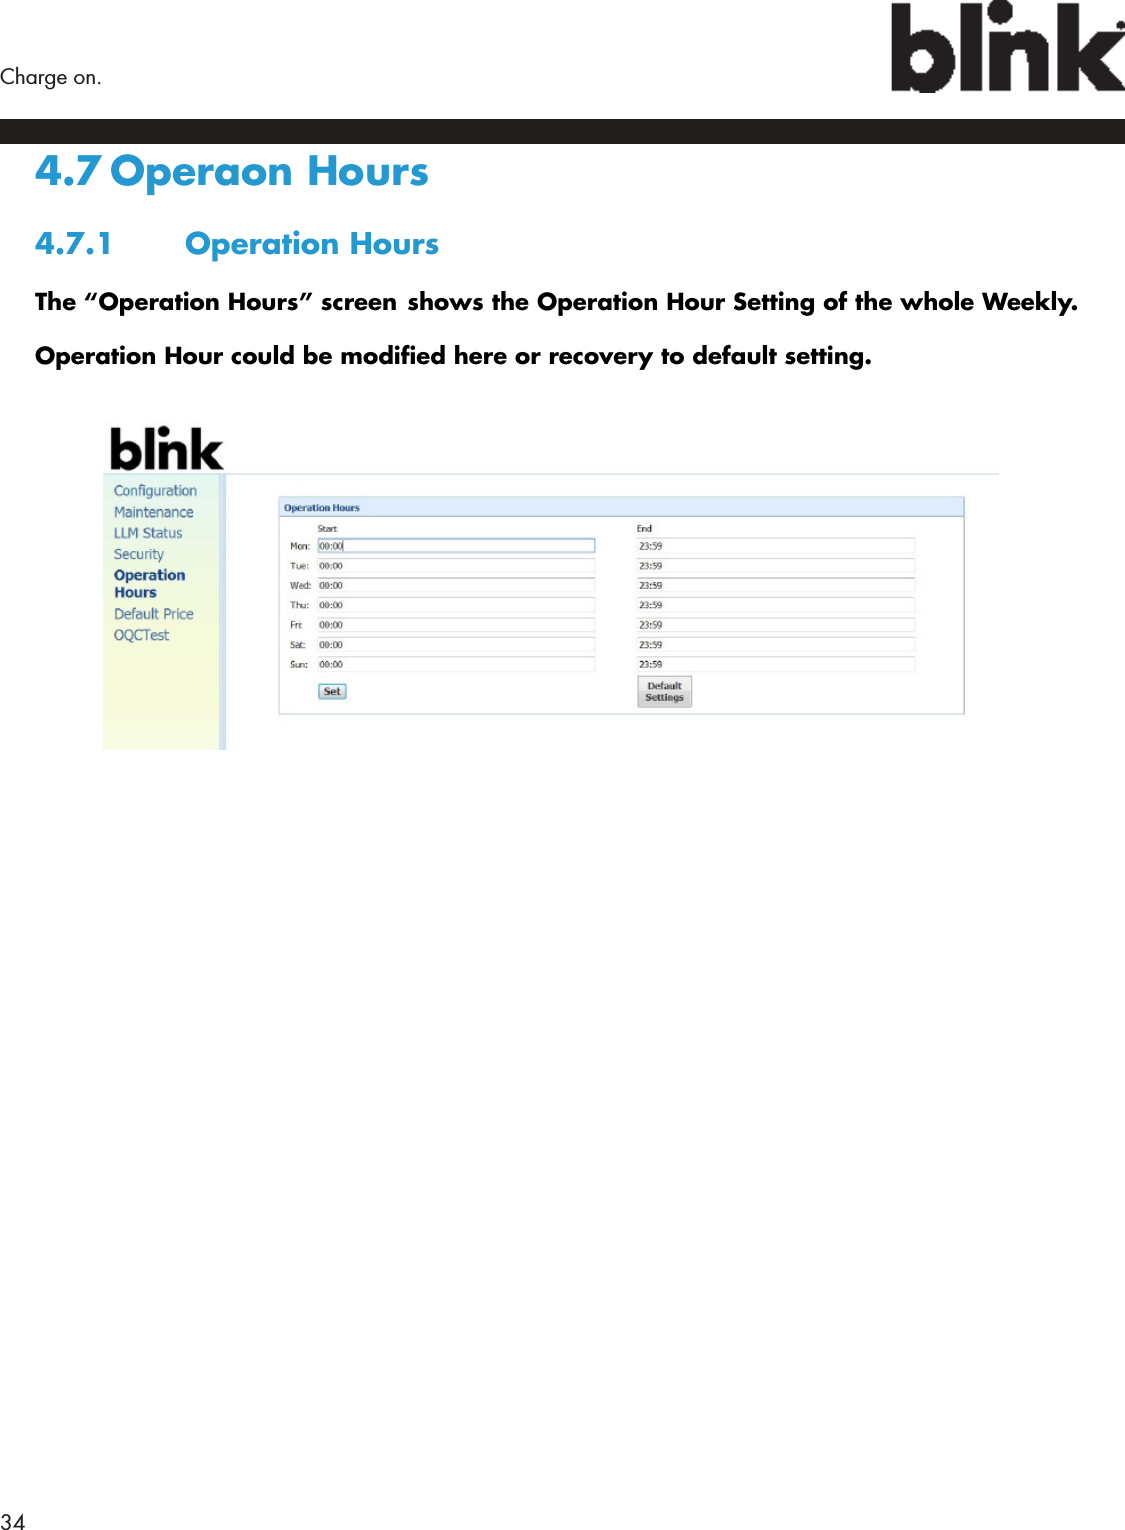 34  Charge on.4.7 Operaon  Hours4.7.1  Operation HoursThe “Operation Hours” screen shows the Operation Hour Setting of the whole Weekly. Operation Hour could be modied here or recovery to default setting.